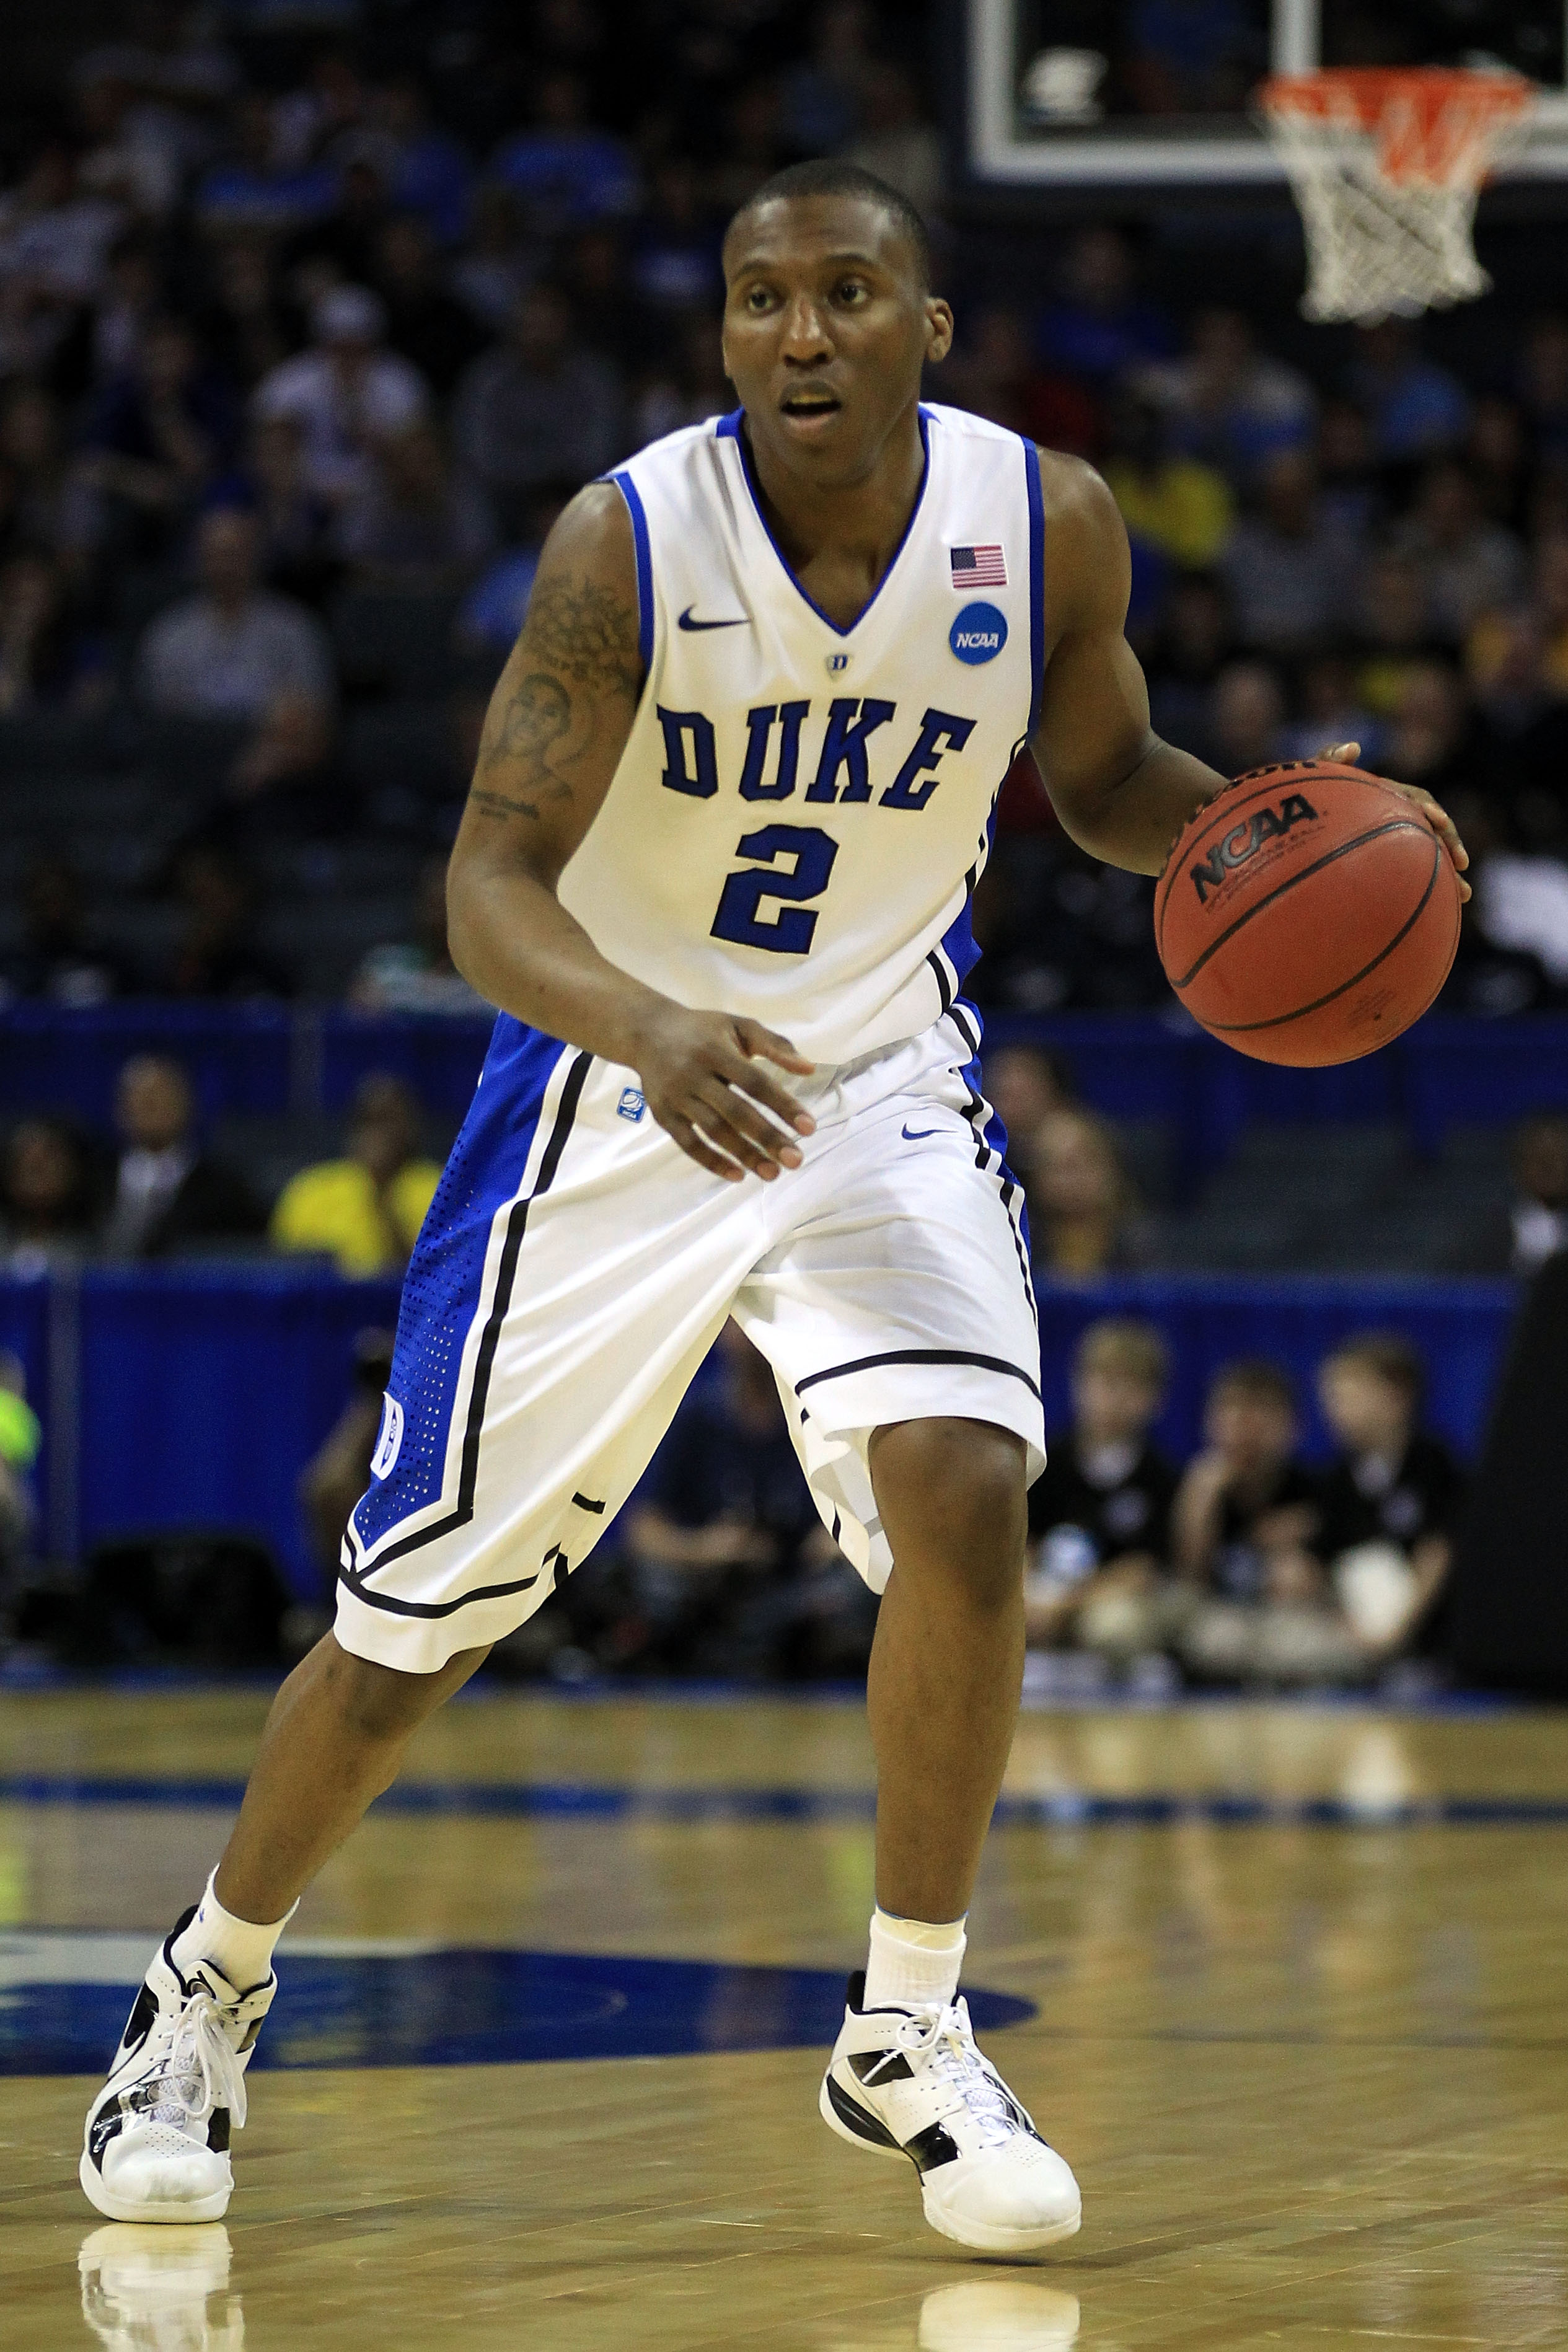 CHARLOTTE, NC - MARCH 20:  Nolan Smith #2 of the Duke Blue Devils moves the ball while taking on the Michigan Wolverines during the third round of the 2011 NCAA men's basketball tournament at Time Warner Cable Arena on March 20, 2011 in Charlotte, North C